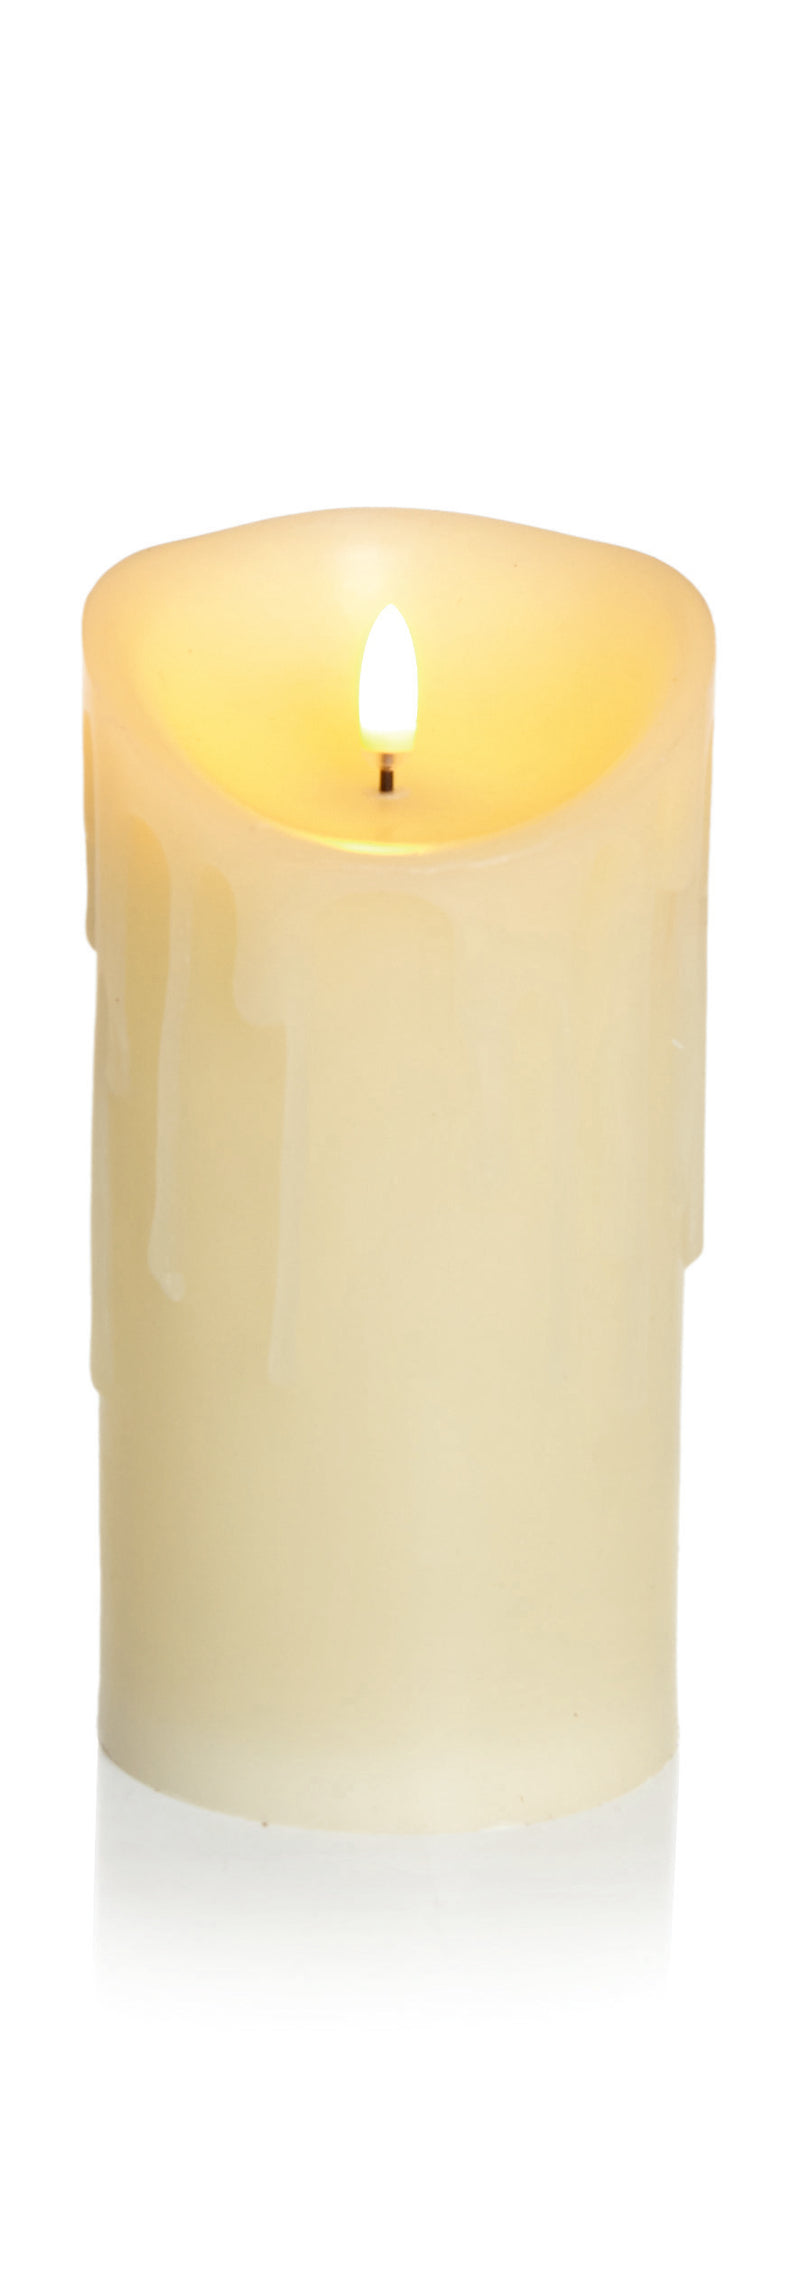 18cm Flickabright Battery Operated Candle